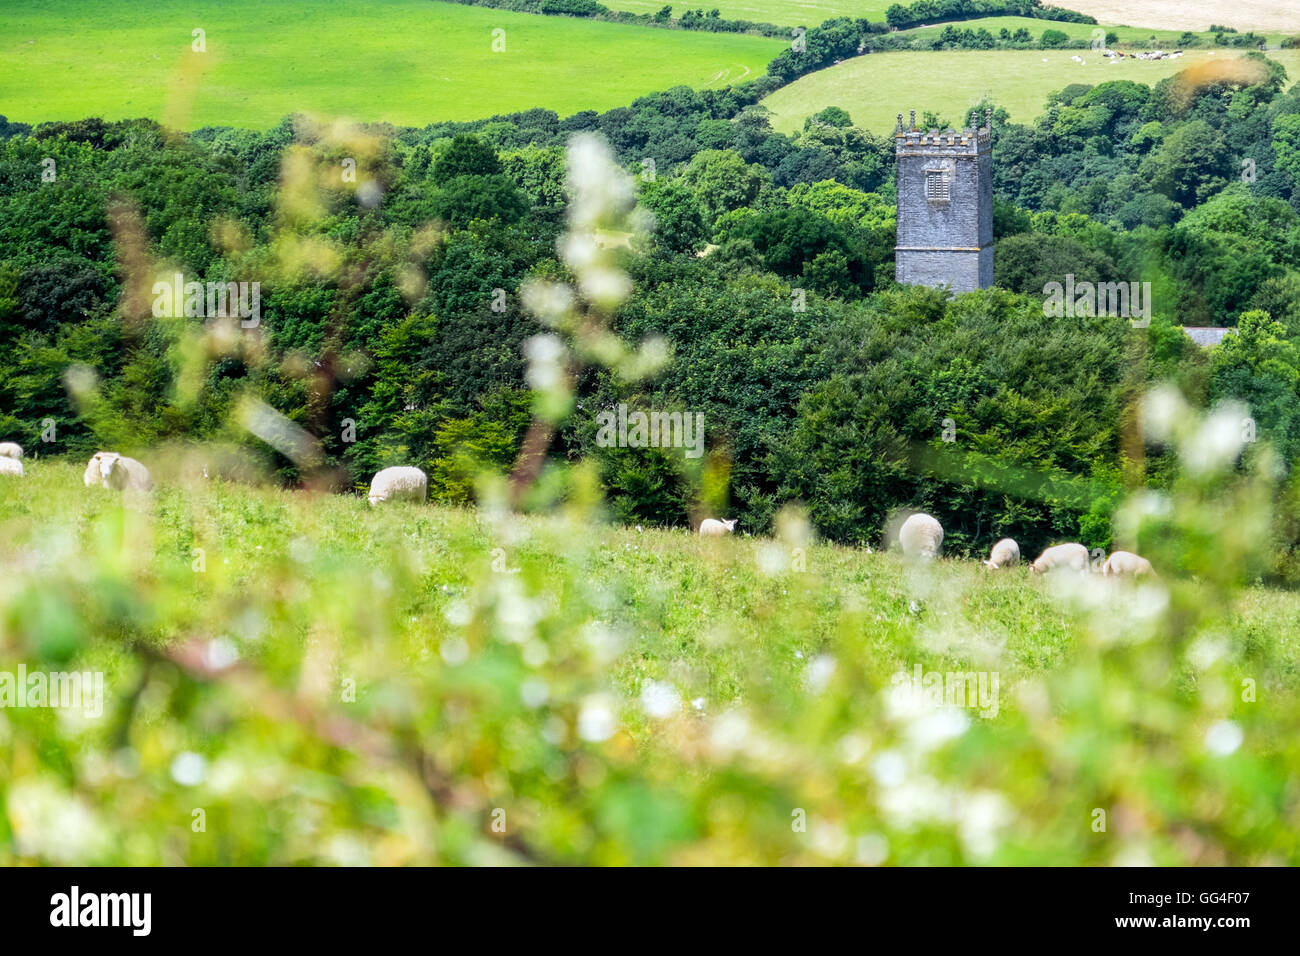 A church tower in a typical rural English landscape of fields and woodland, Cornwall Stock Photo